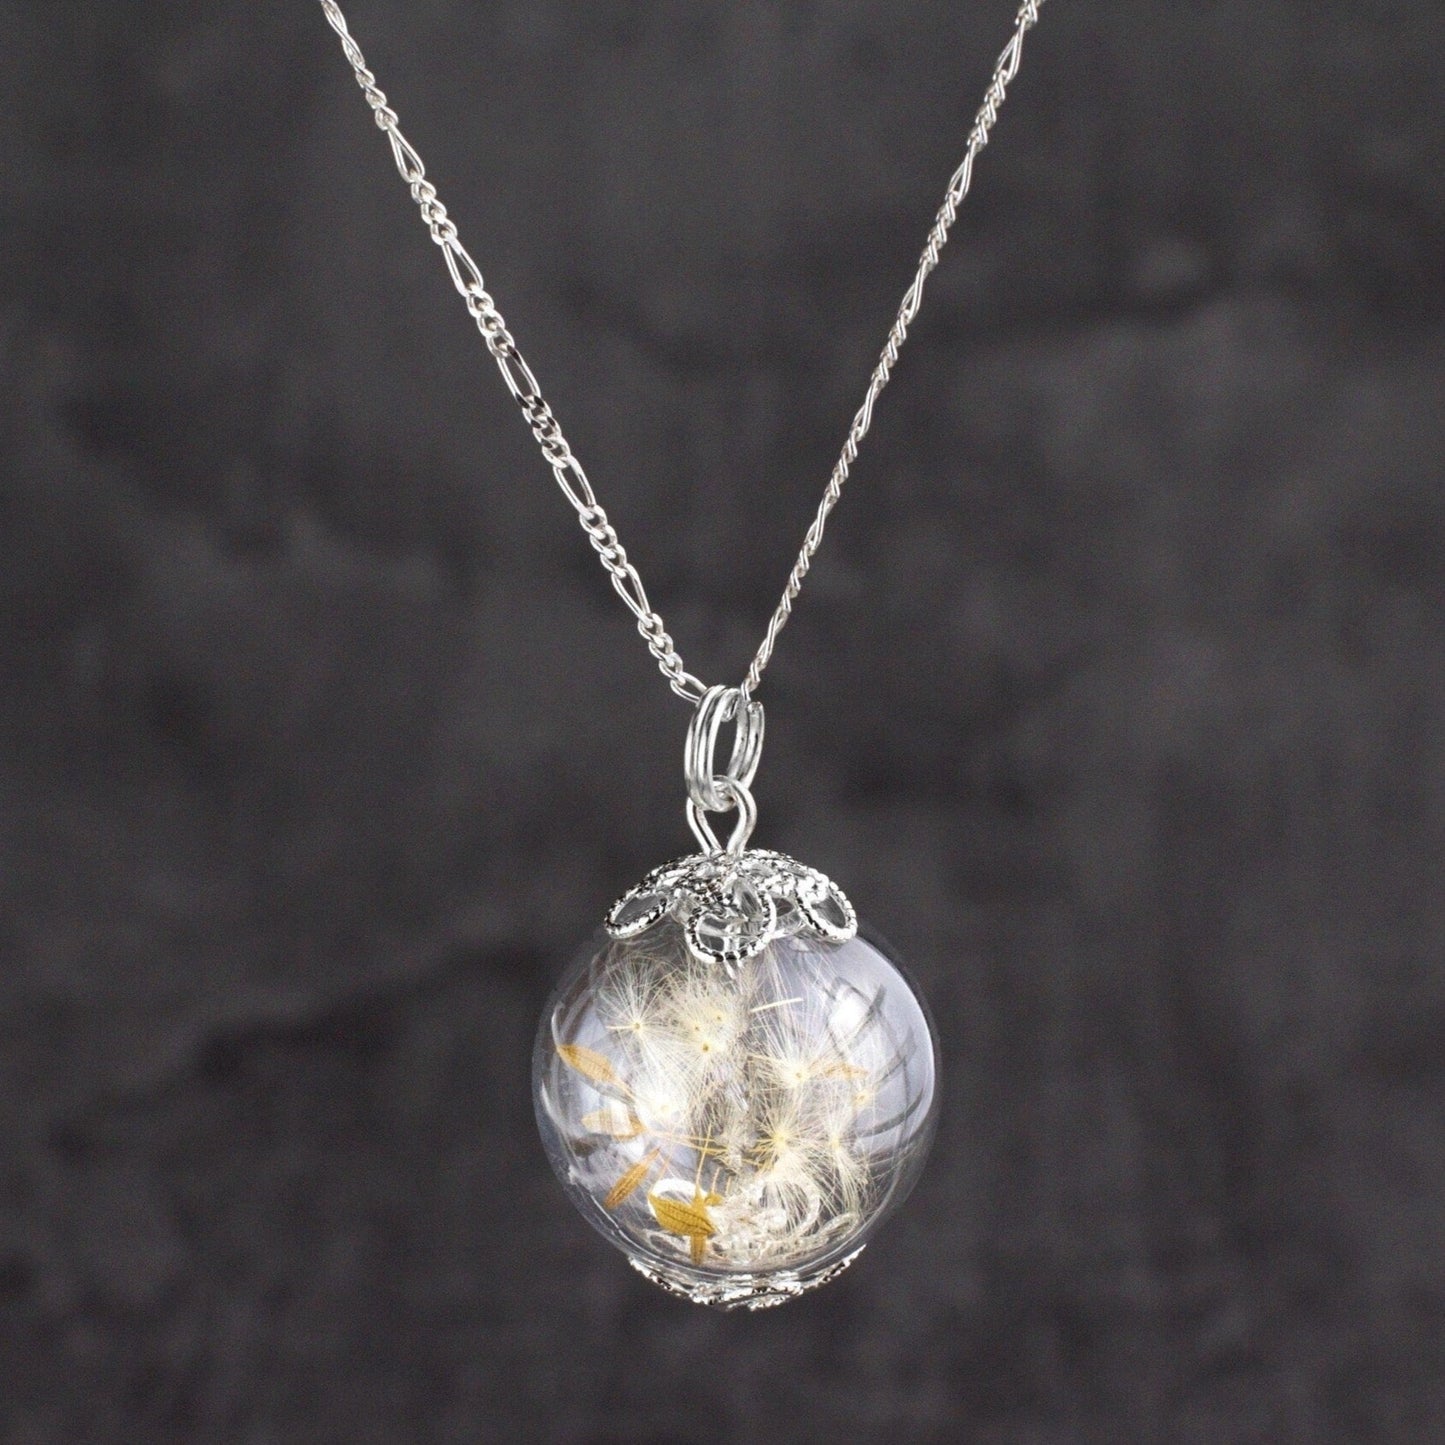 Pustflumen Seeds Pendant Necklace - 925 Sterling Silver Dried Blossom Botany Chain - K925-15